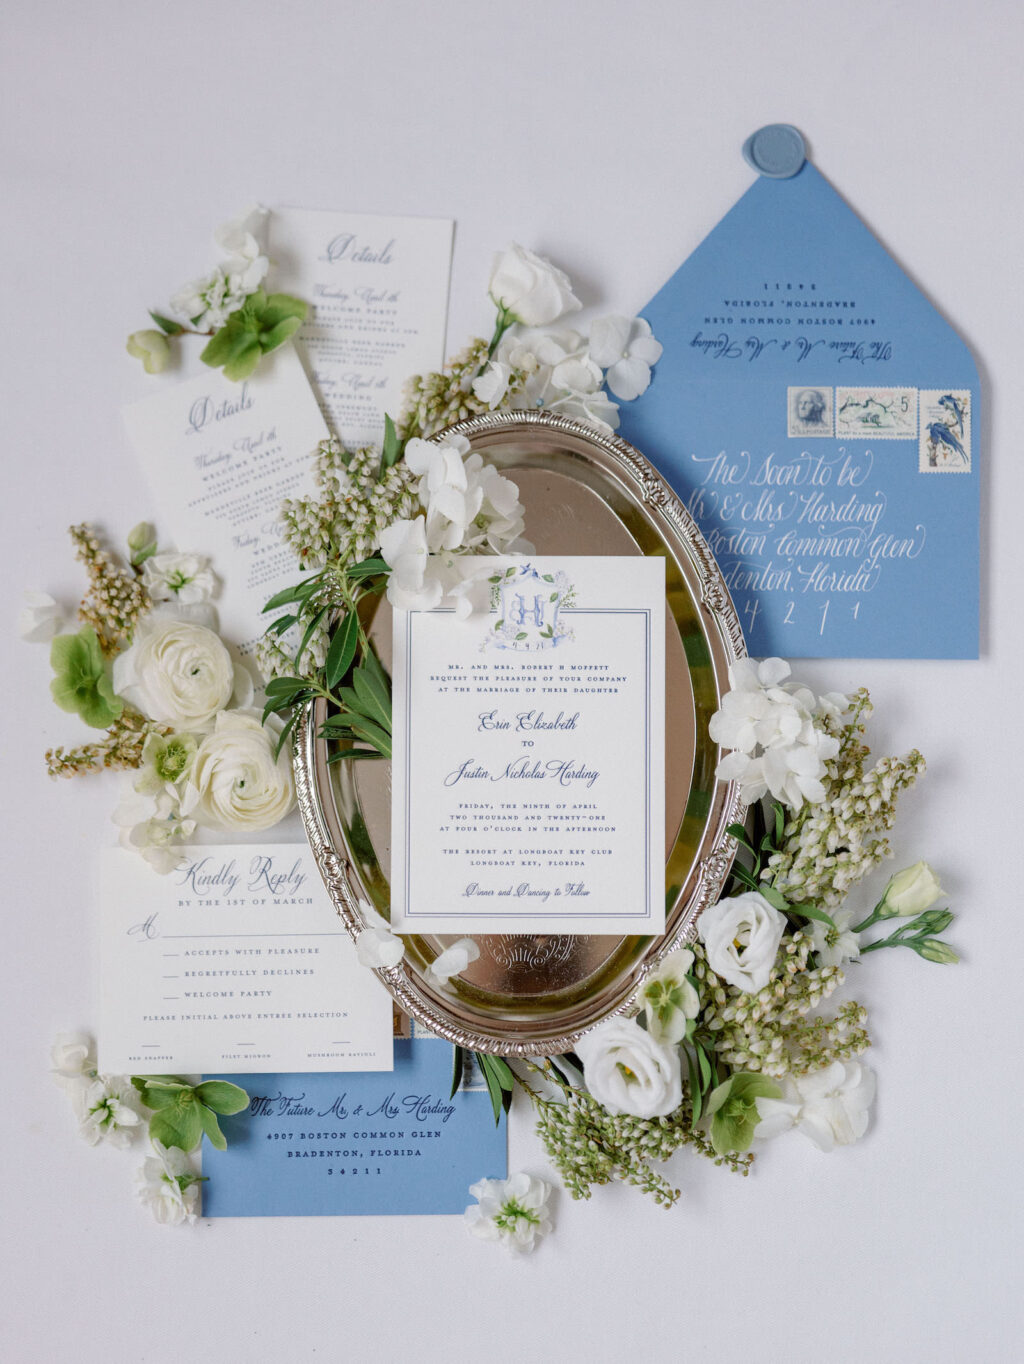 Elegant Wedding Invitation and Stationary Suite, Dusty Blue and White Envelopes, Ivory Florals, Silver Serving Tray